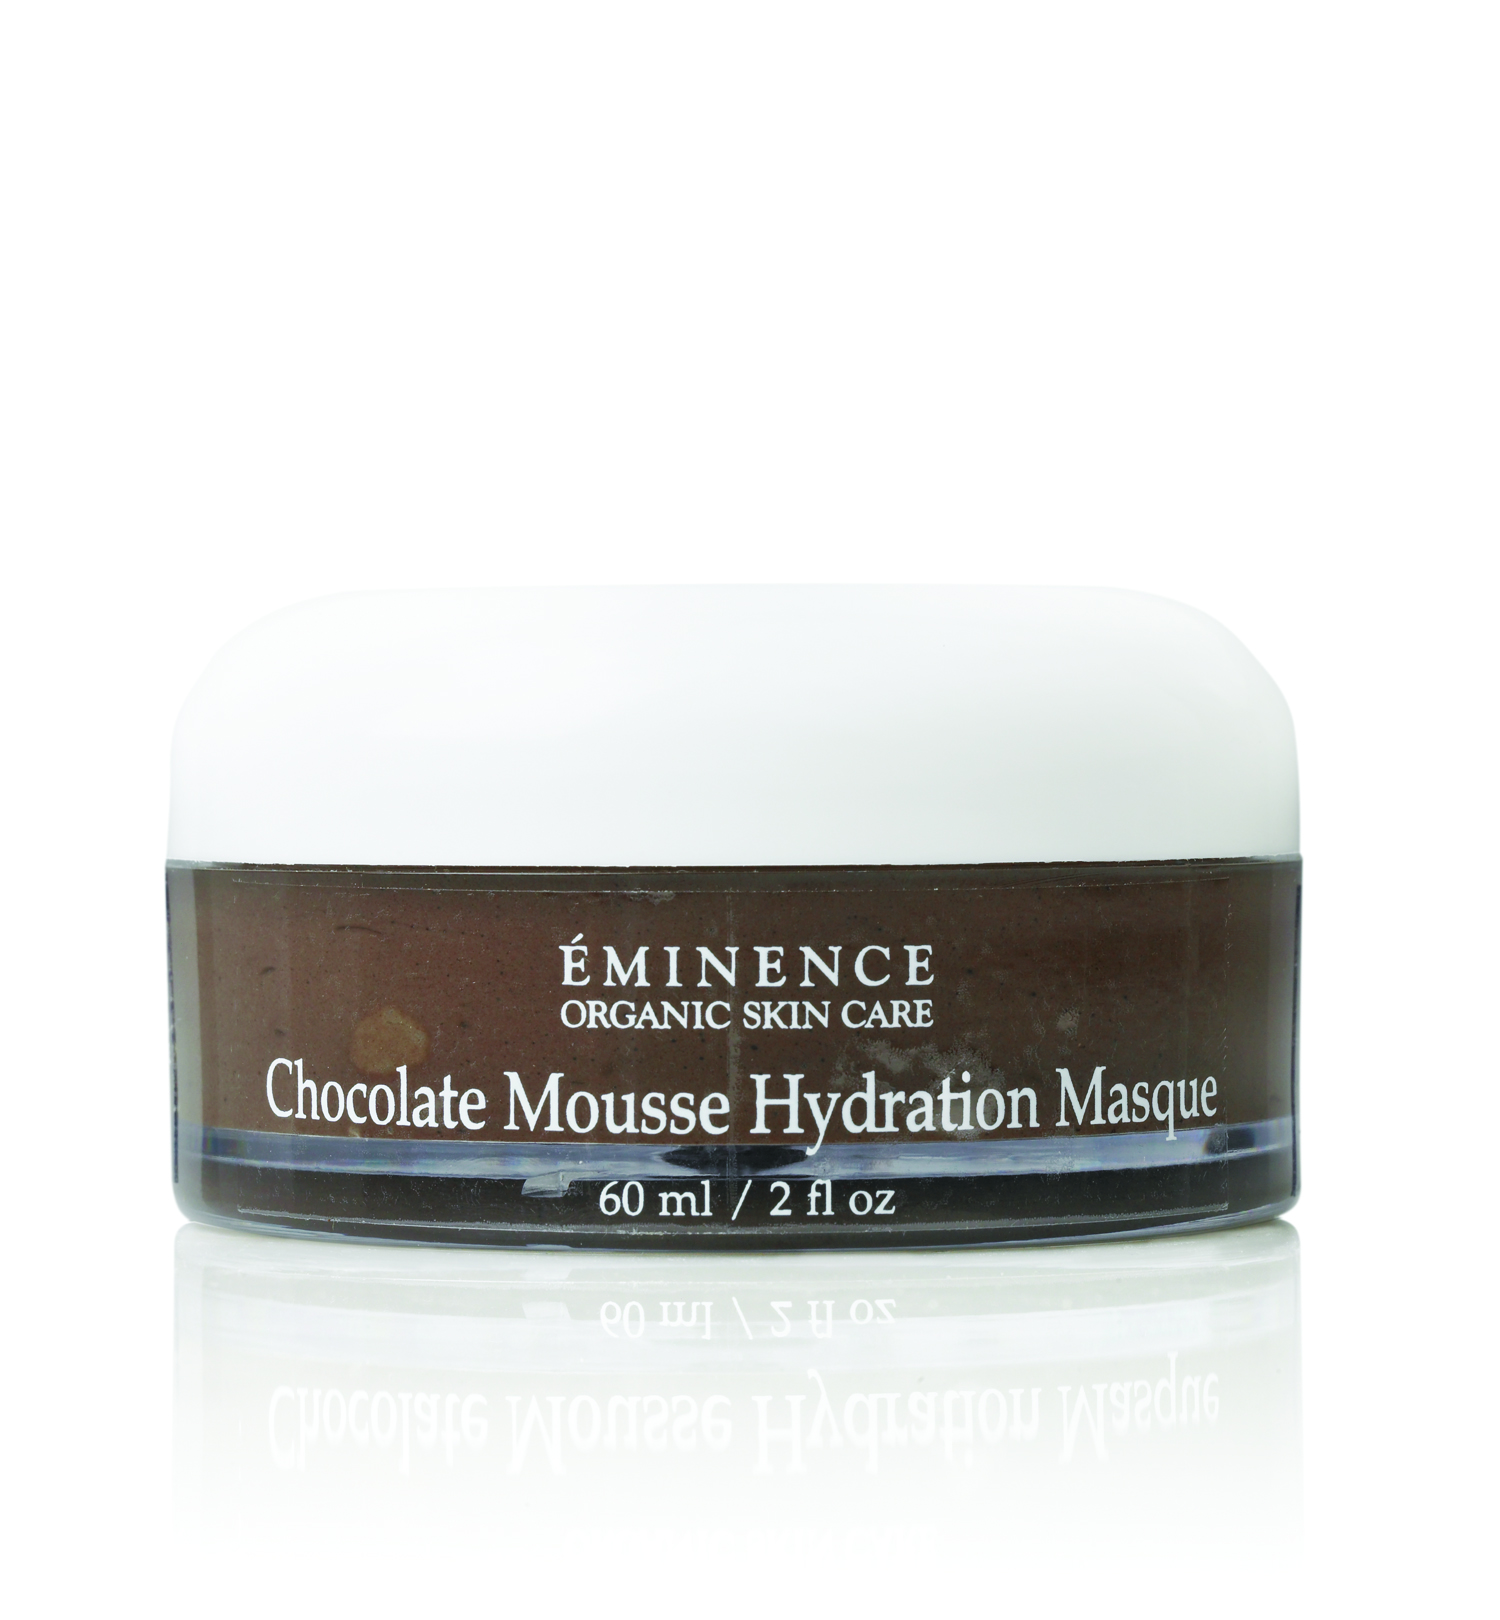 eminence-organics-chocolate-mousse-hydration-masque-5in-hr1